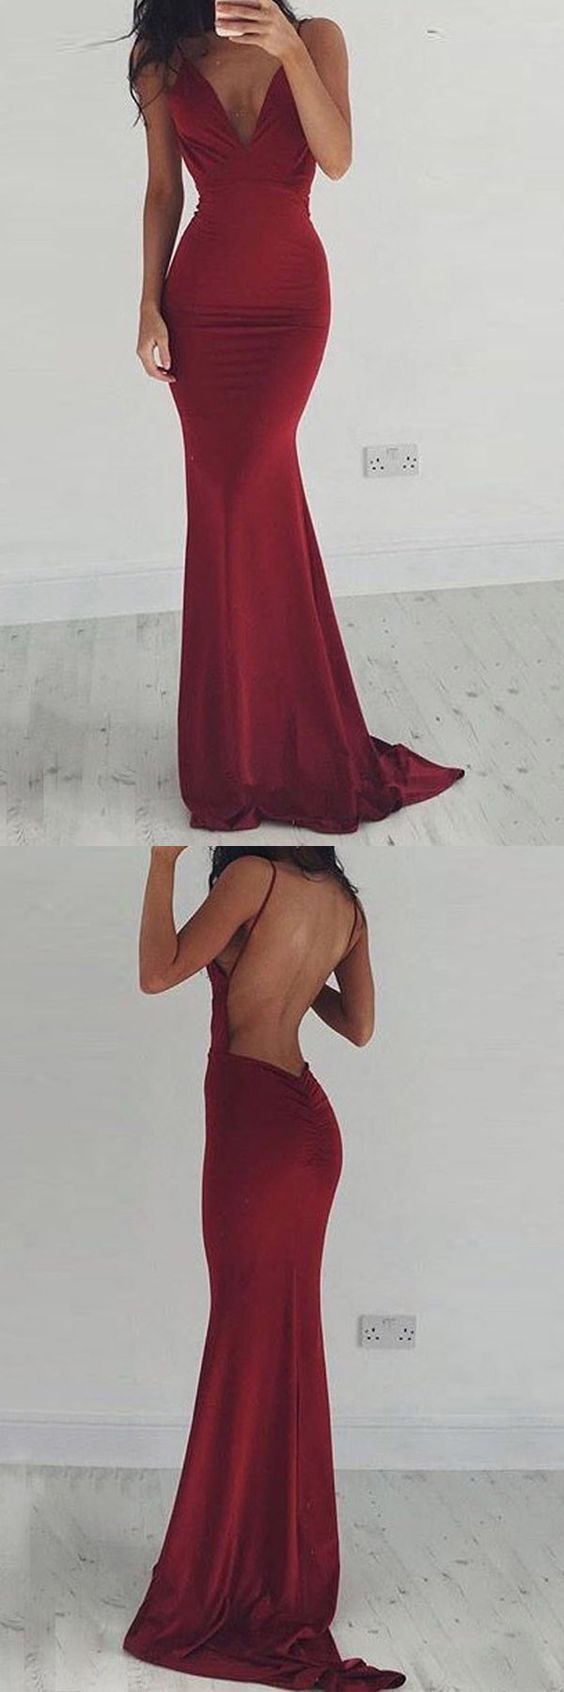 Sexy Prom Dress Long, Prom Dresses, Evening Dress, Dance Dress, Graduation School Party Gown, PC0371 - Promcoming